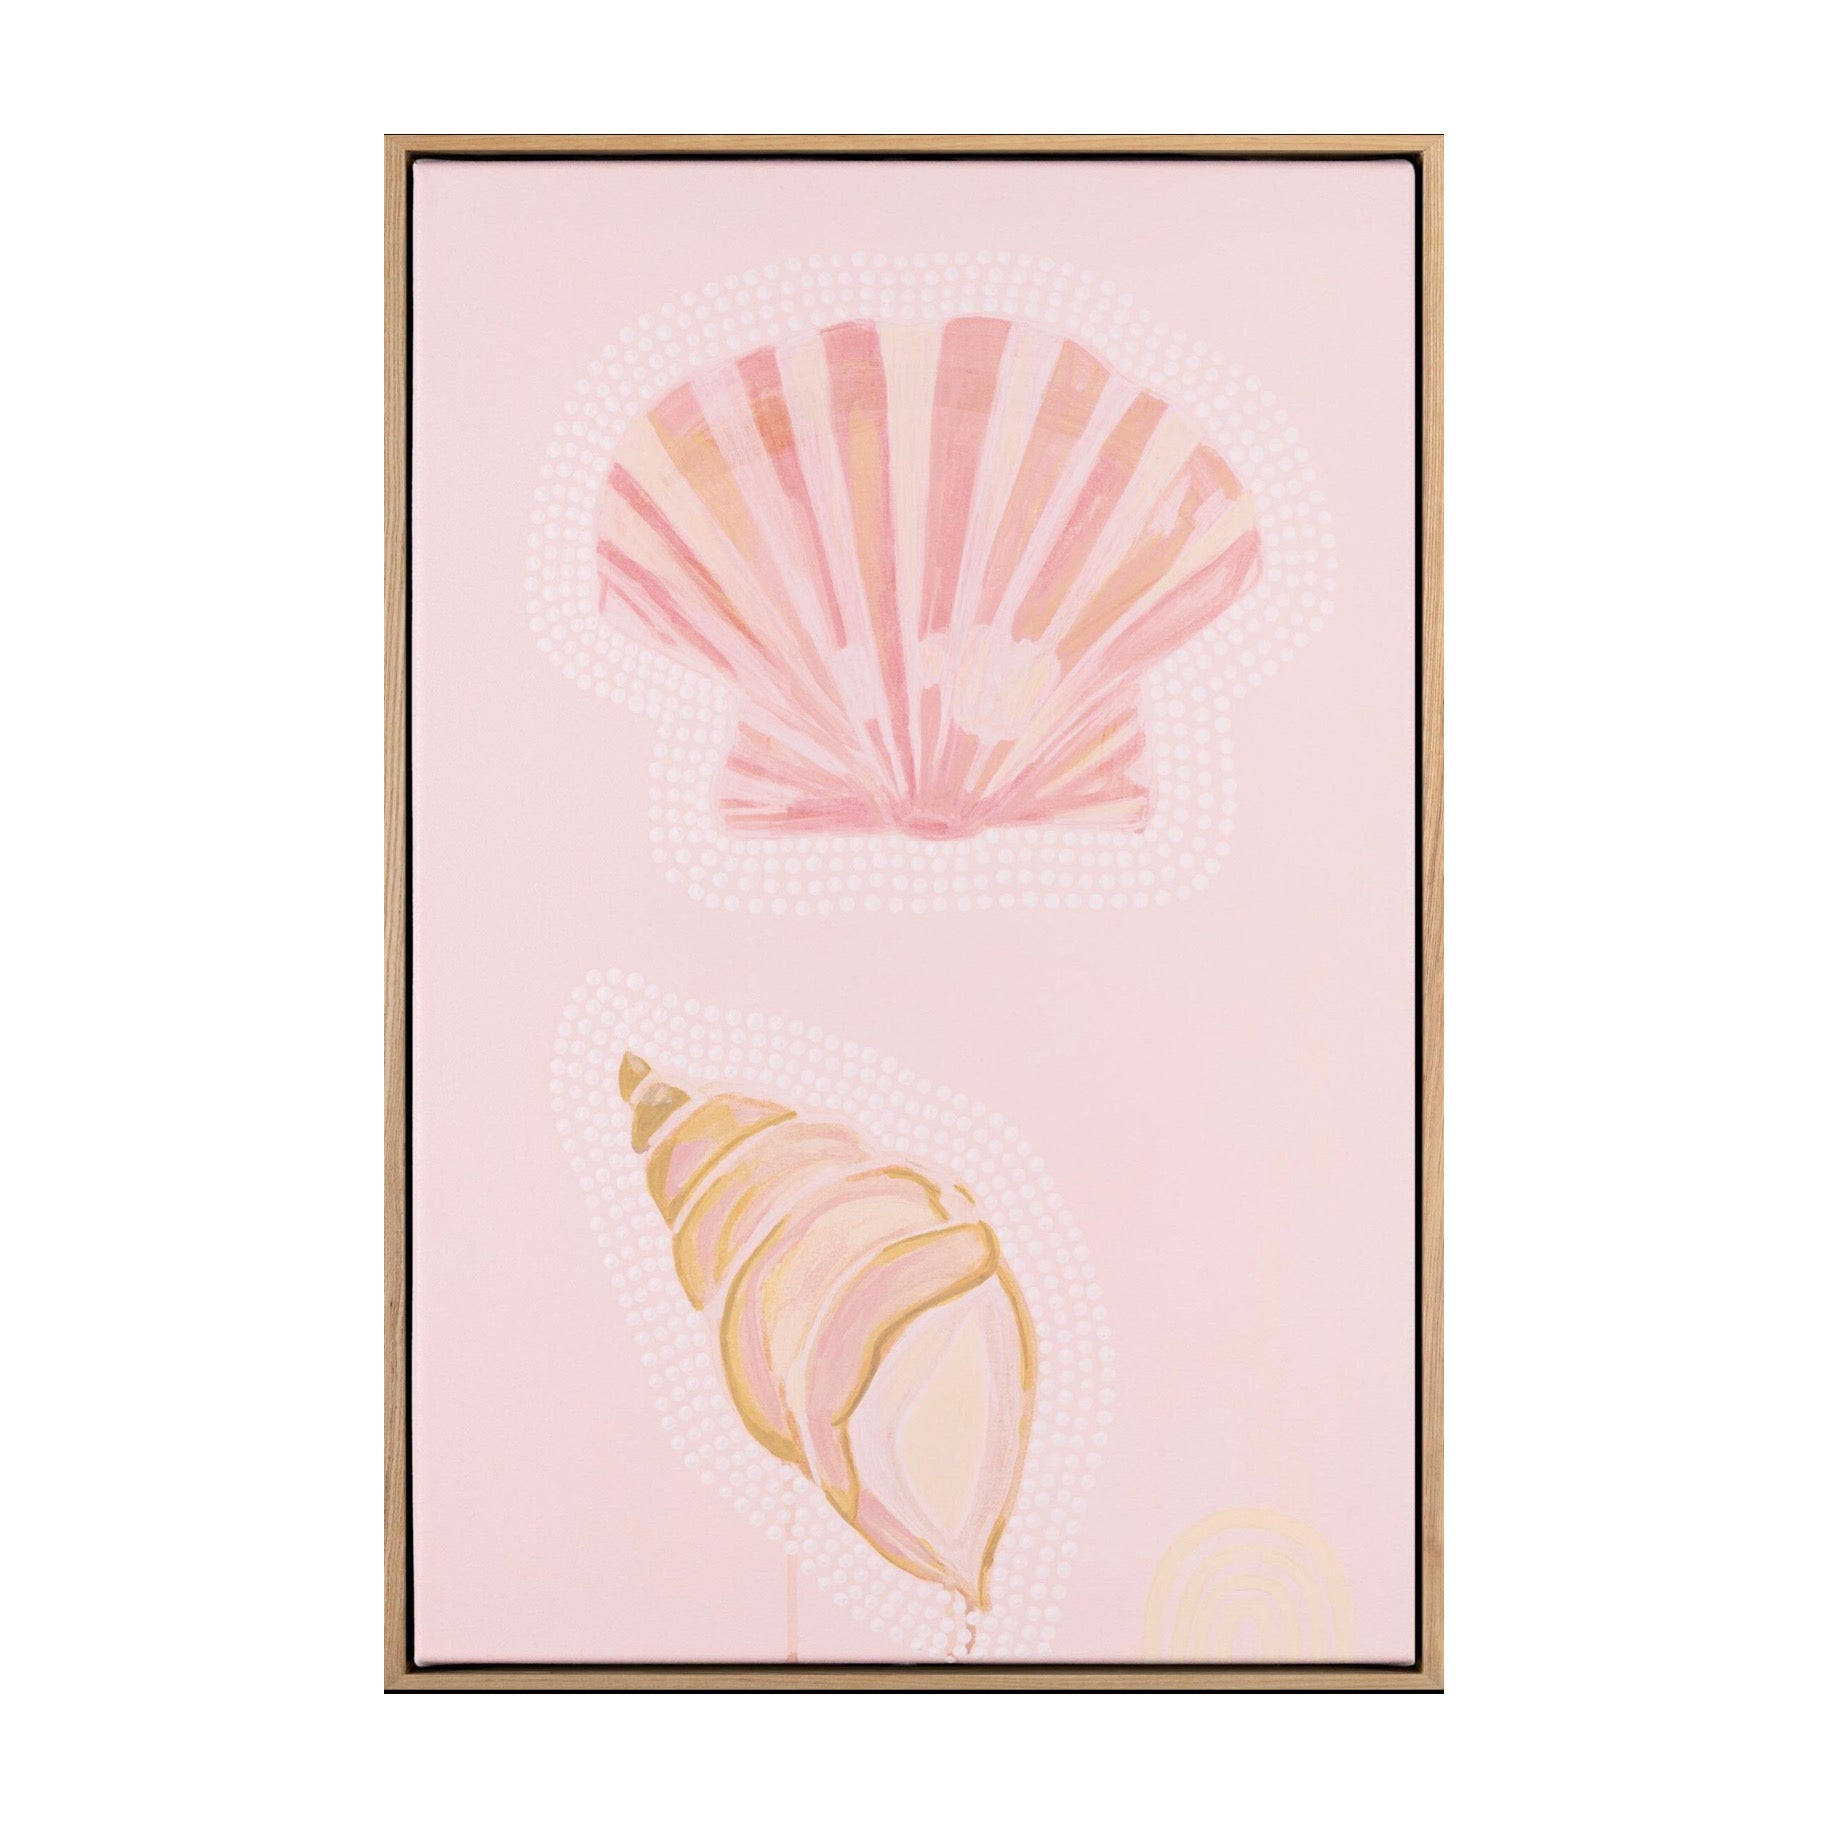 Sea shells by the sea shore - Limited Edition Print